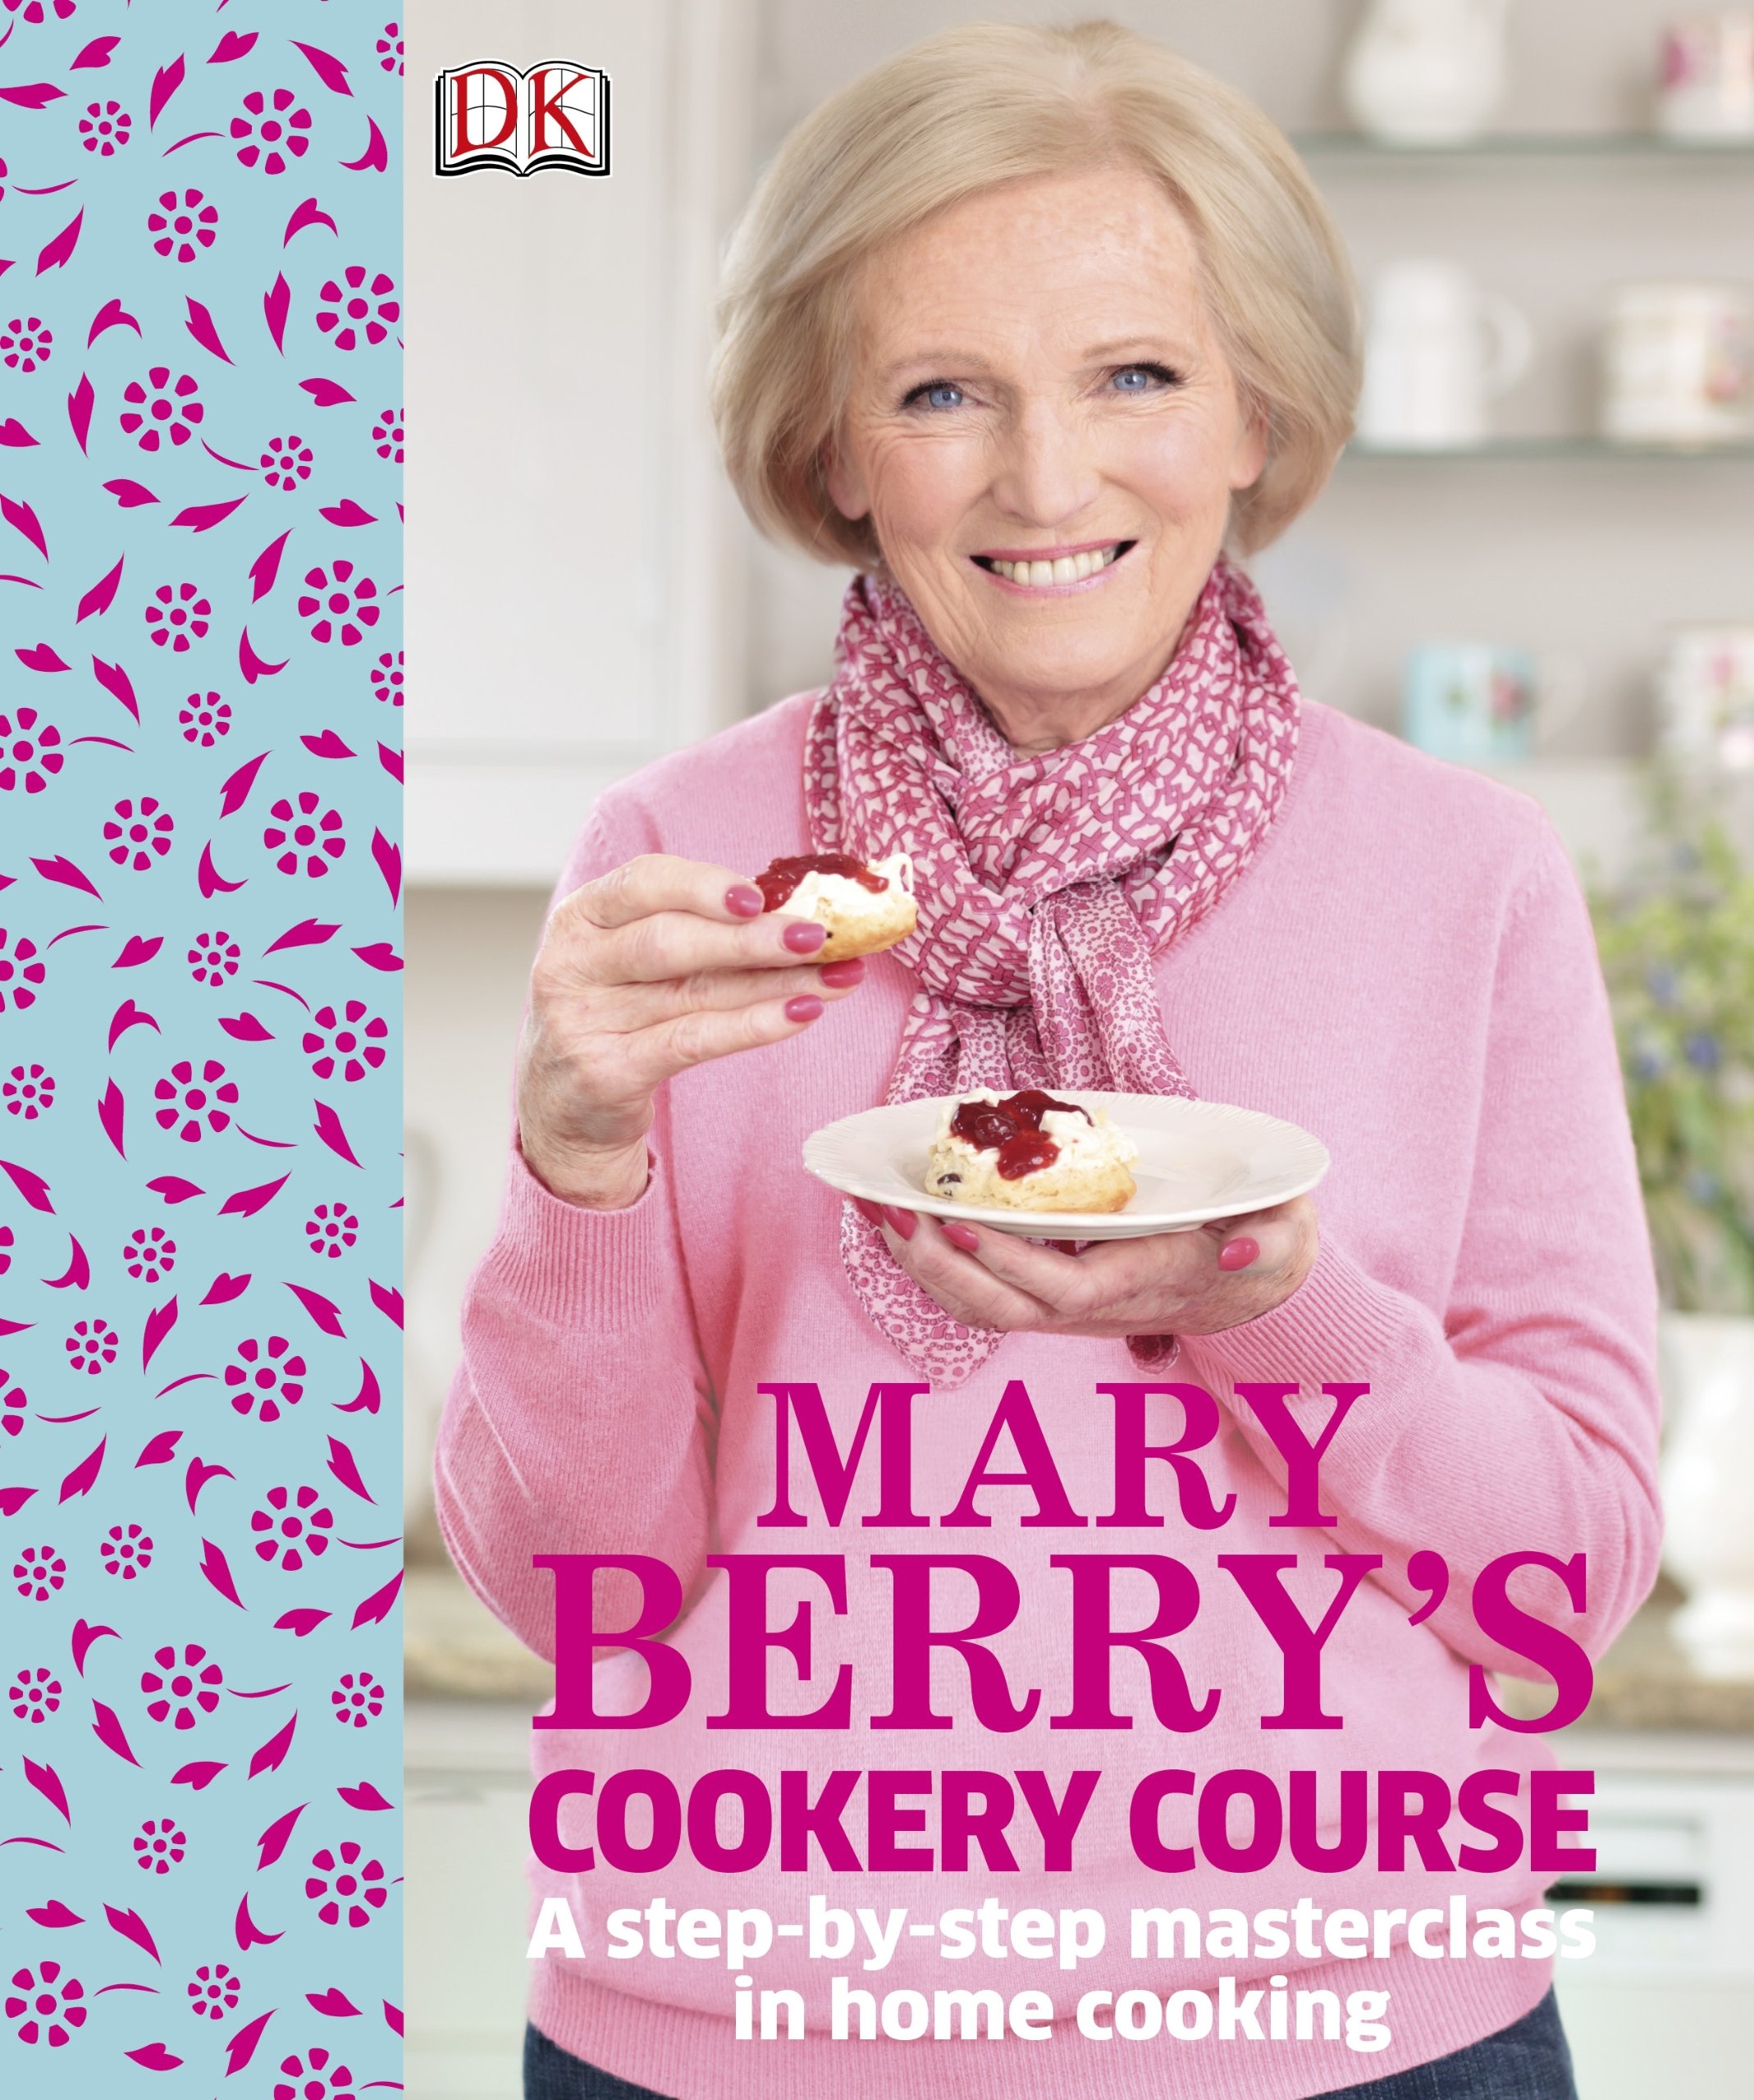 Mary berry's cookery course :  a step-by-step masterclass in home cooking